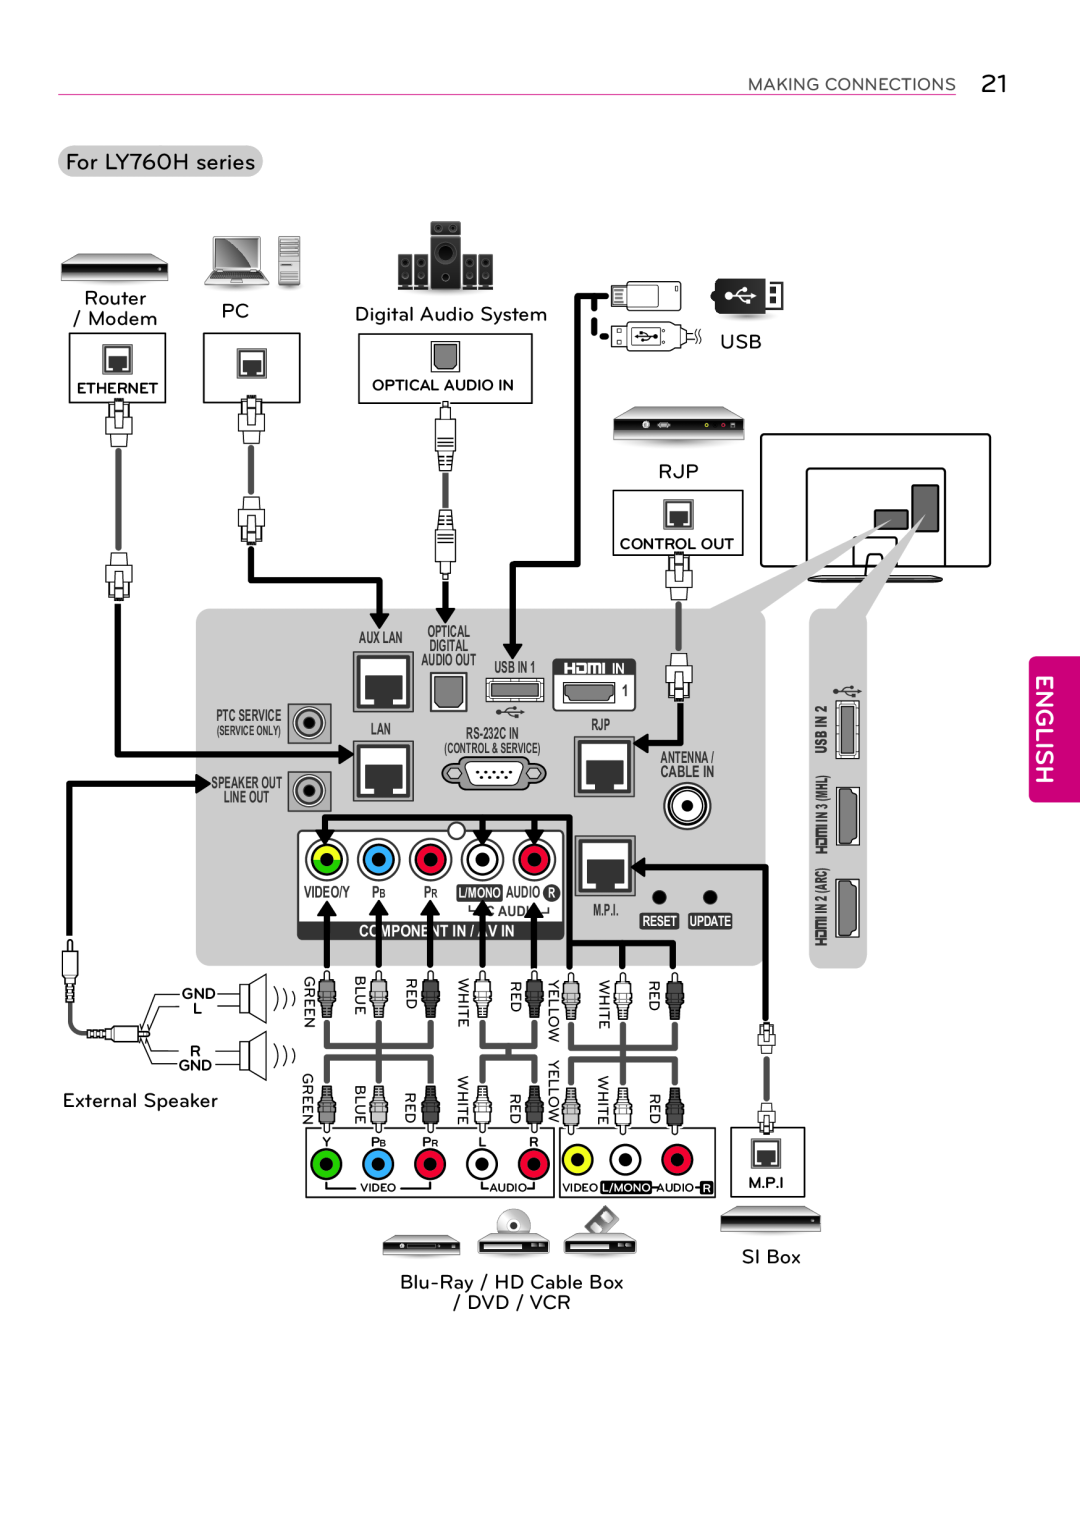 LG Electronics 55LY750H For LY760H series, English, Making Connections, Optical Audio In, Ethernet, Control Out, M.P.I 